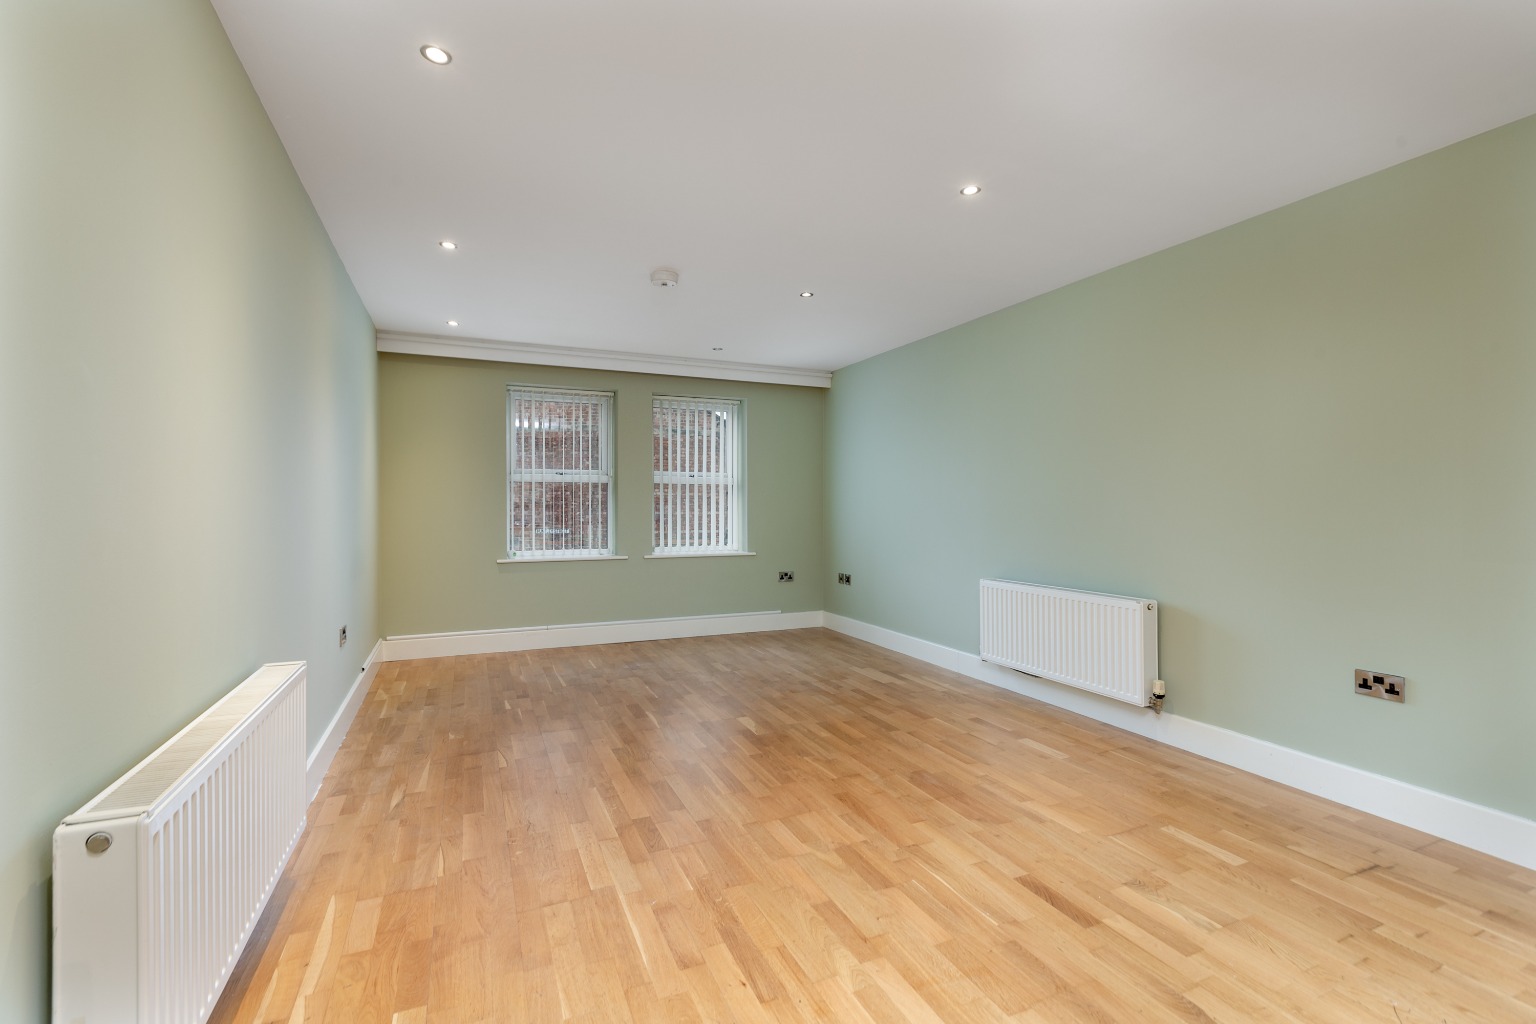 2 bed ground floor flat to rent in Hargreave Terrace, Darlington  - Property Image 2